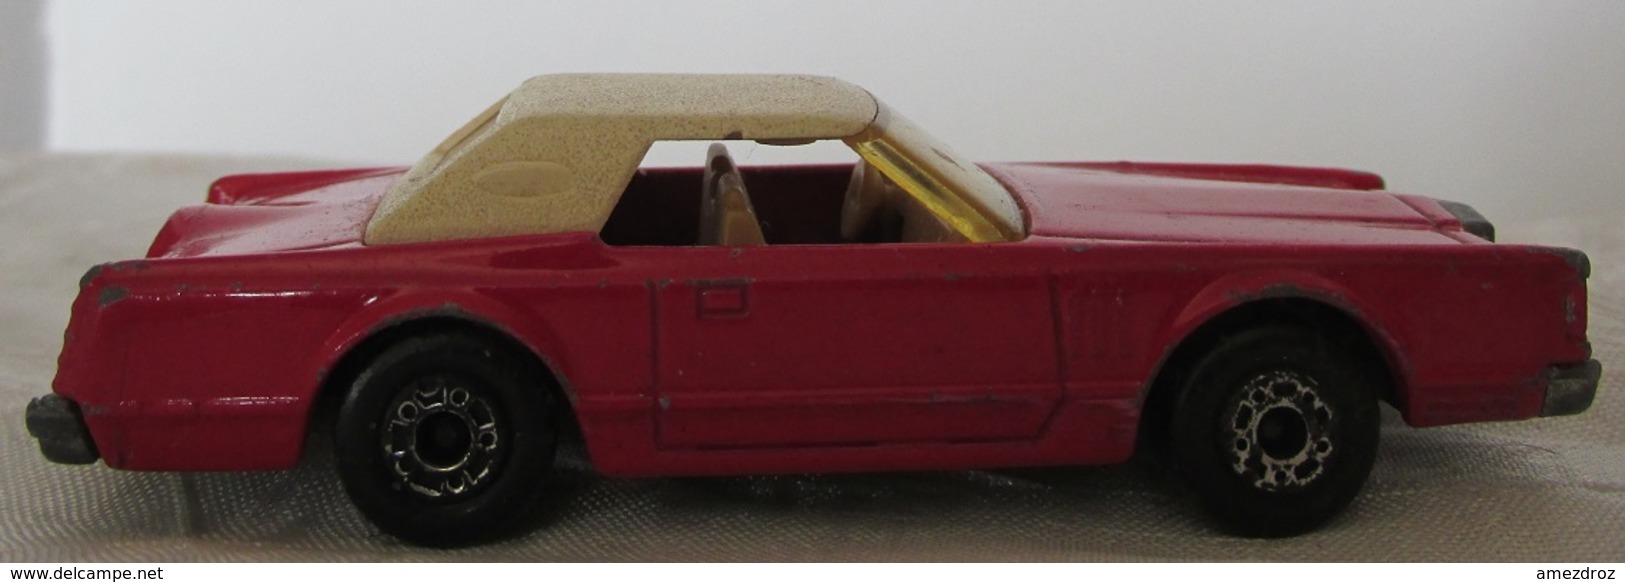 Voiture Matchbox N° 28 Lincoln Continental 1979 Lesney Made In England Longueur 7,5 Cm (4) - Lesney